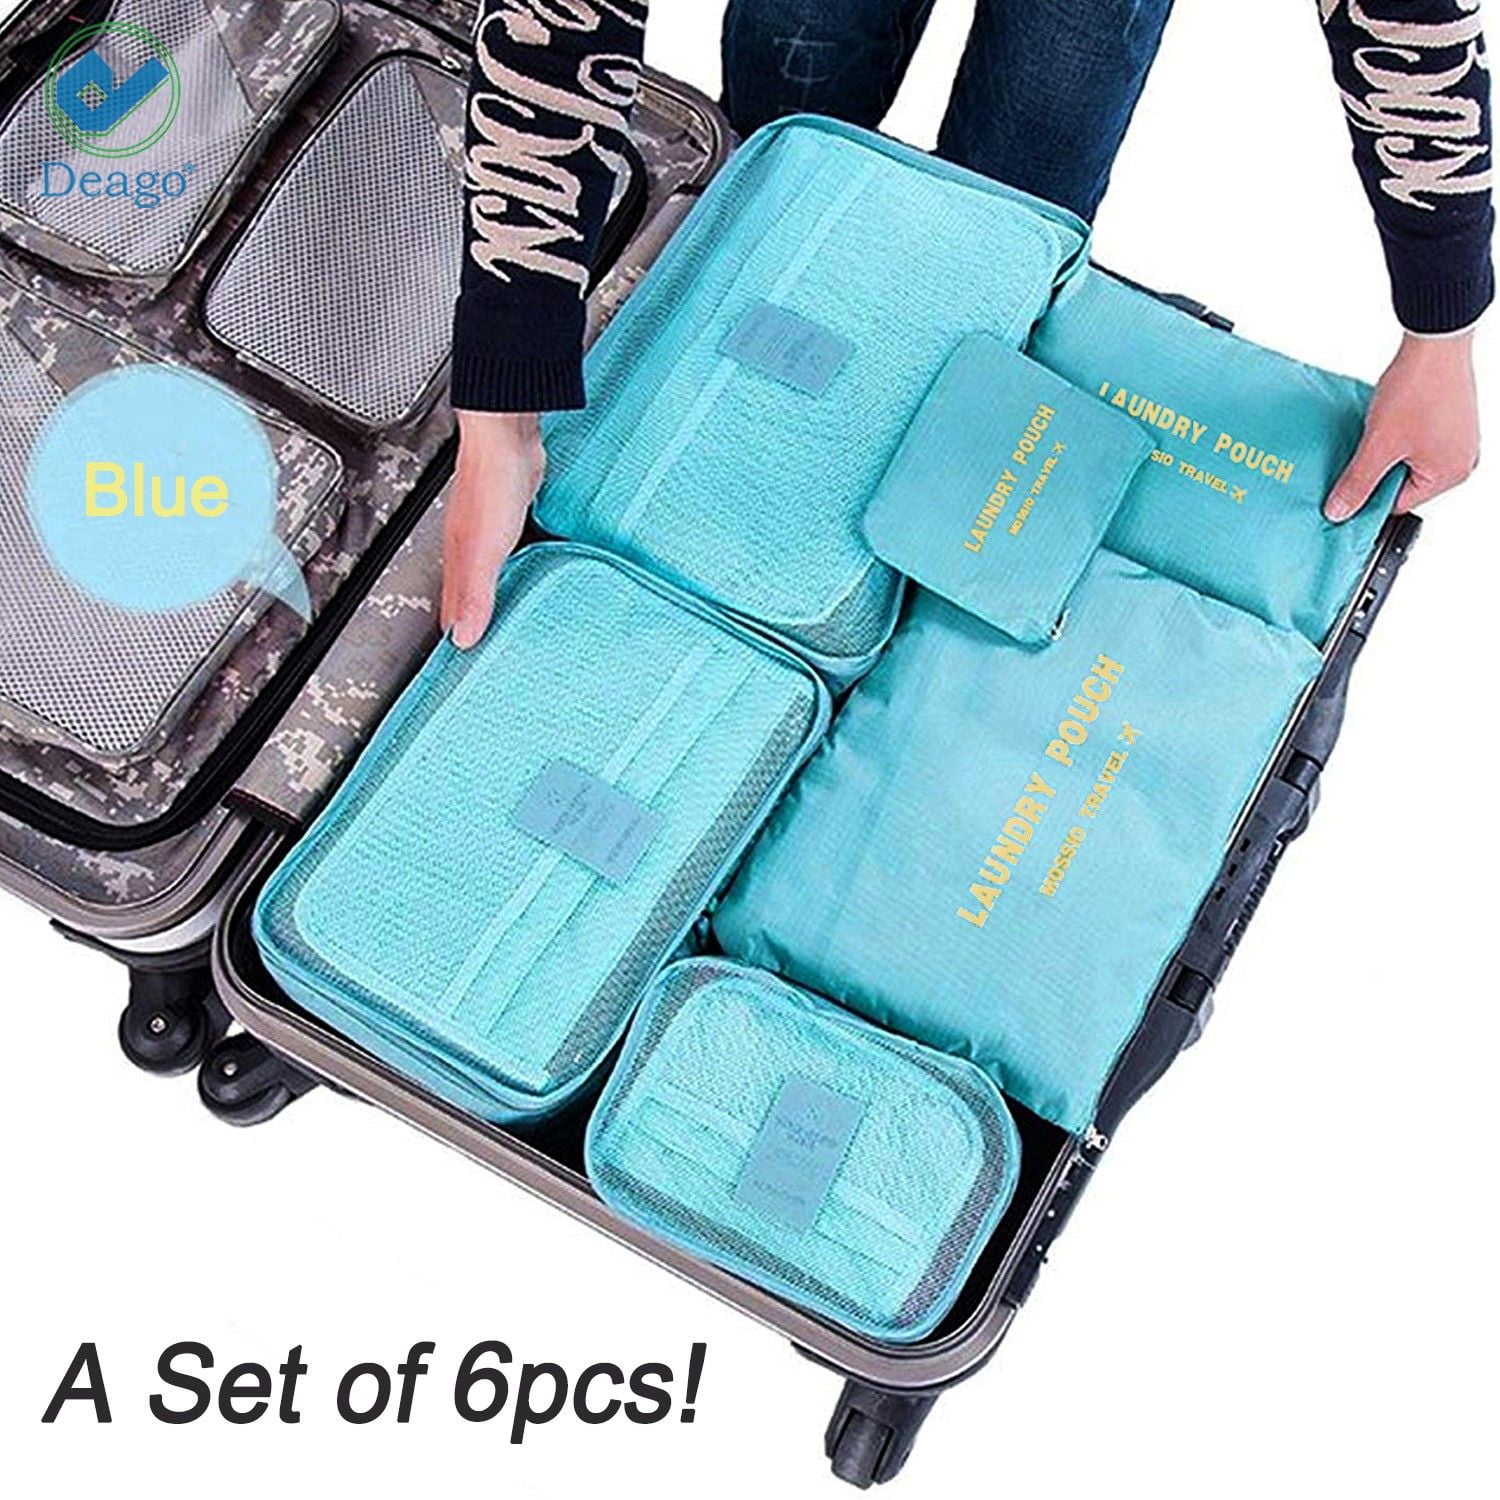 Deago Set of 6 Packing Cubes Compression Travel Carry On Luggage Organizer  Bags Toiletry Bag Lightweight Pouch 